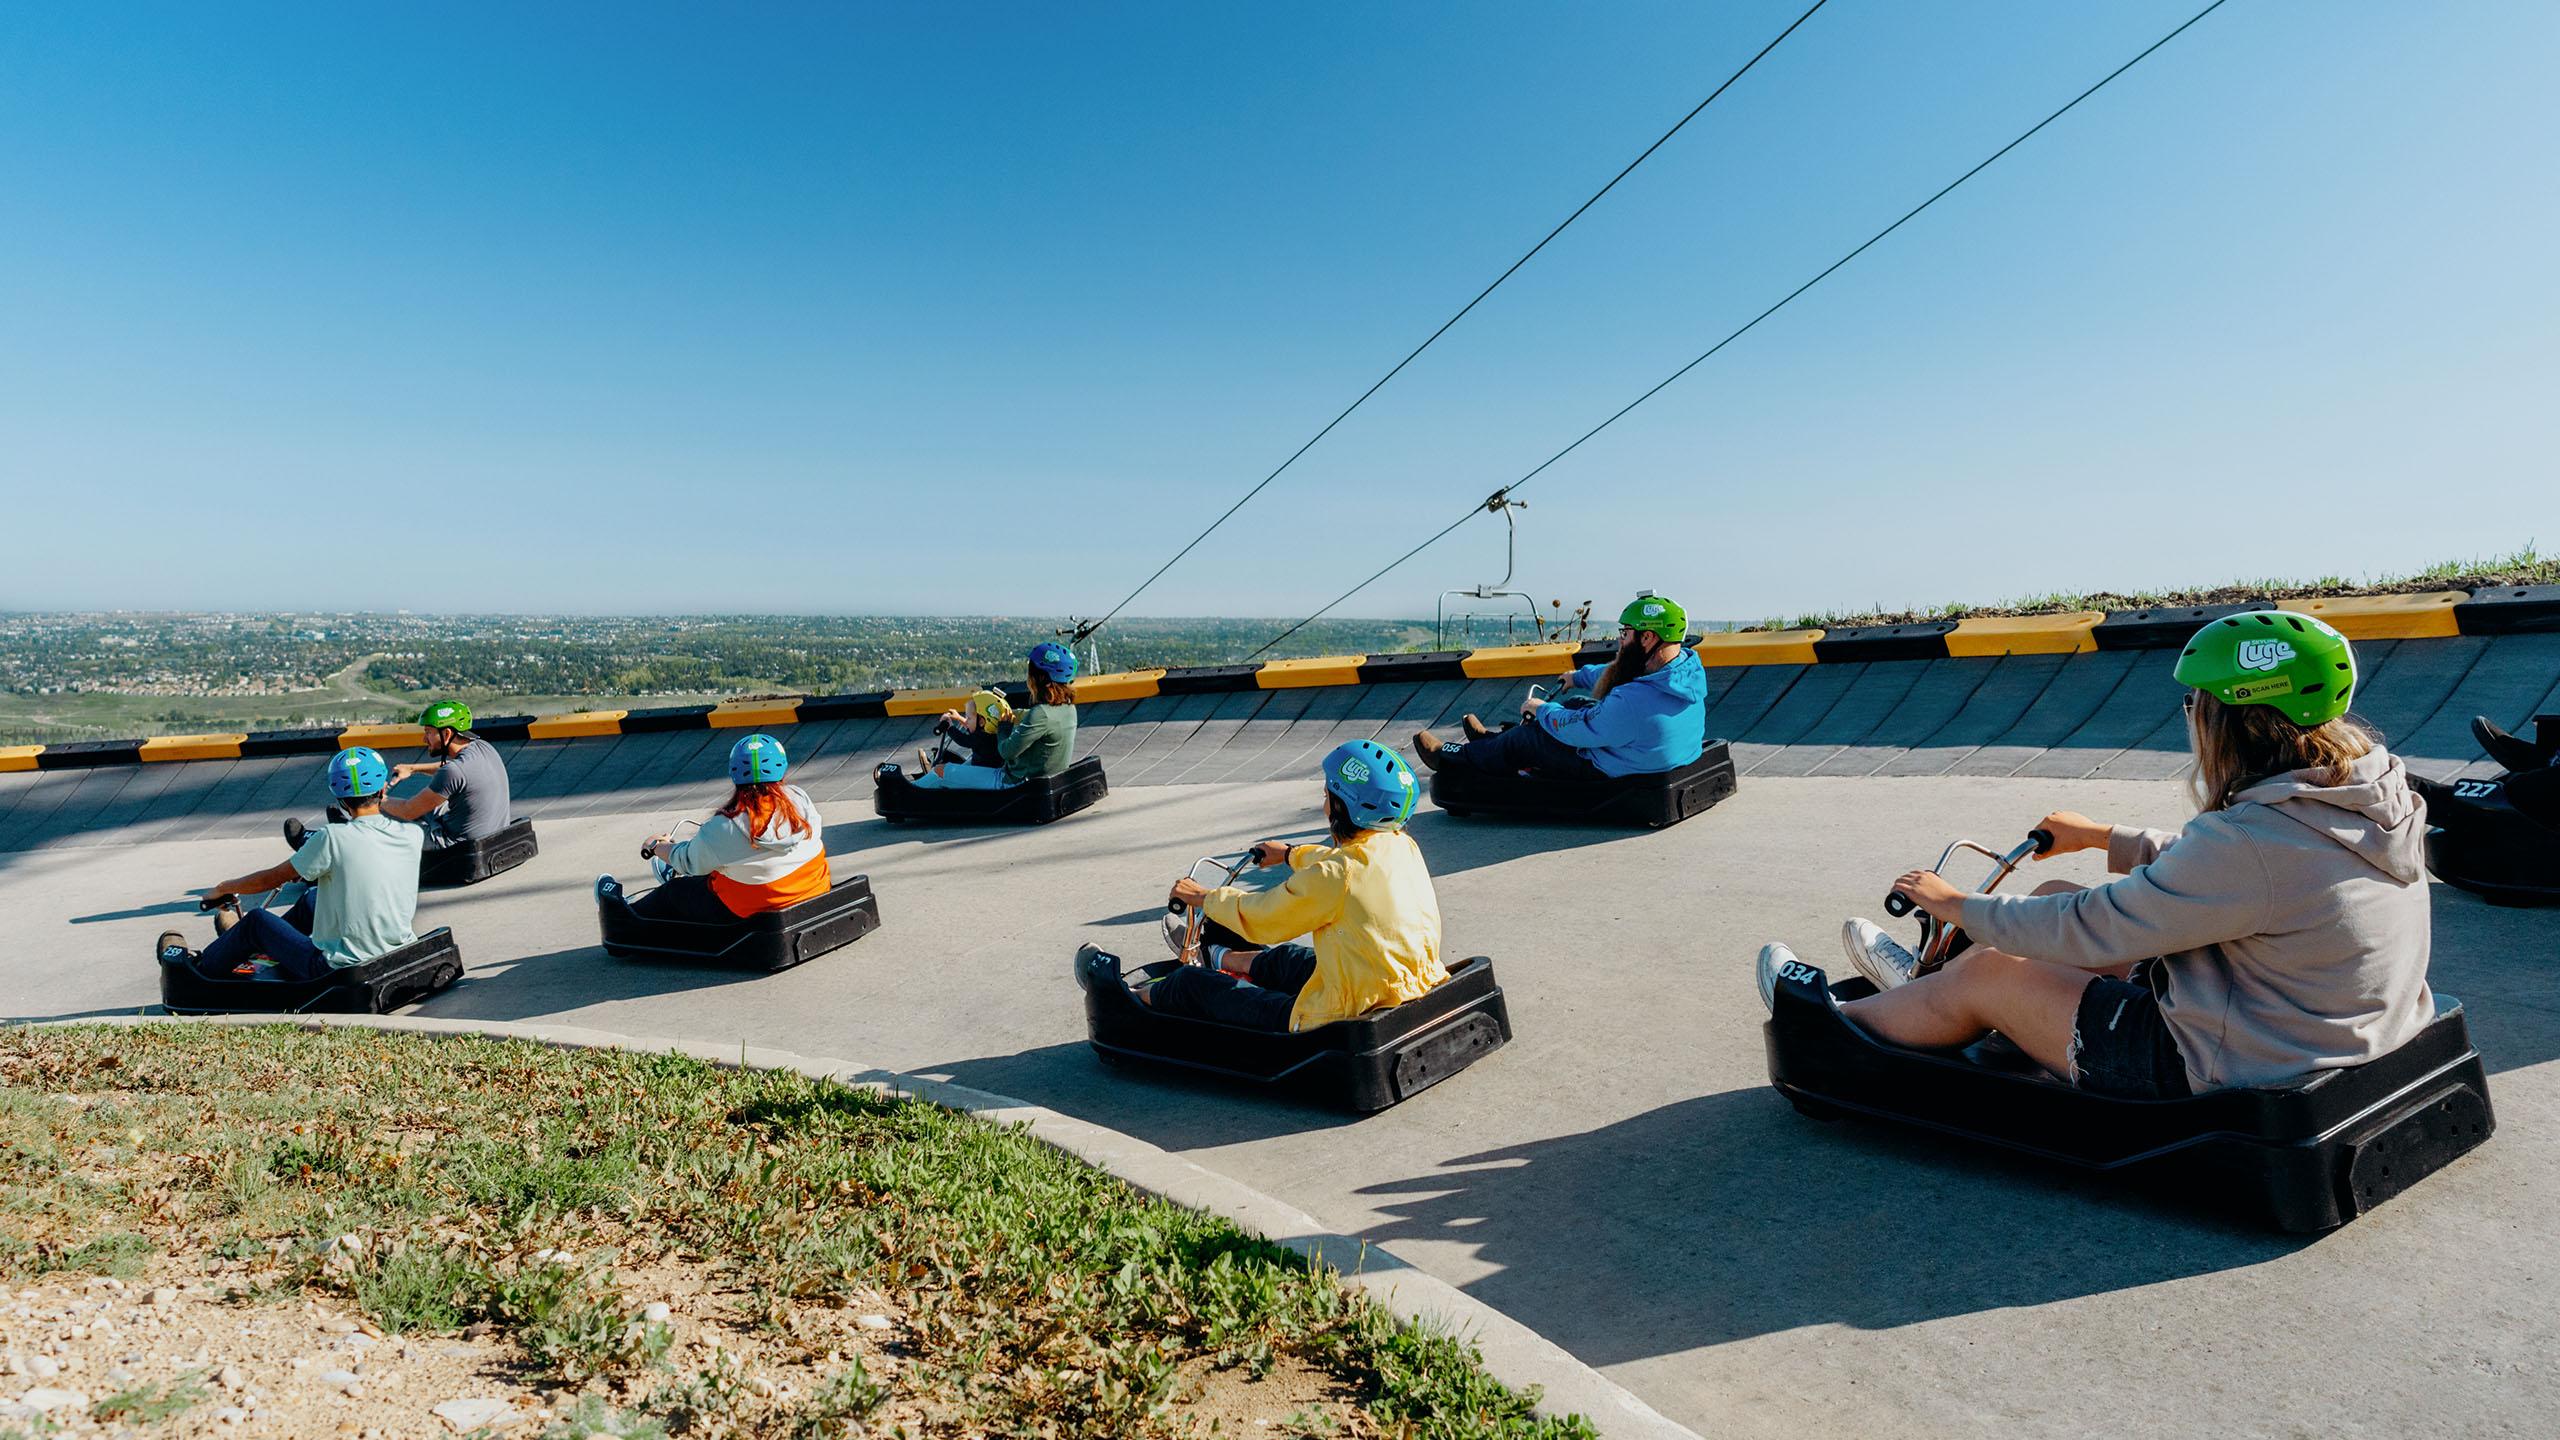 A group of people ride around a corner at Downhill Karting Calgary.